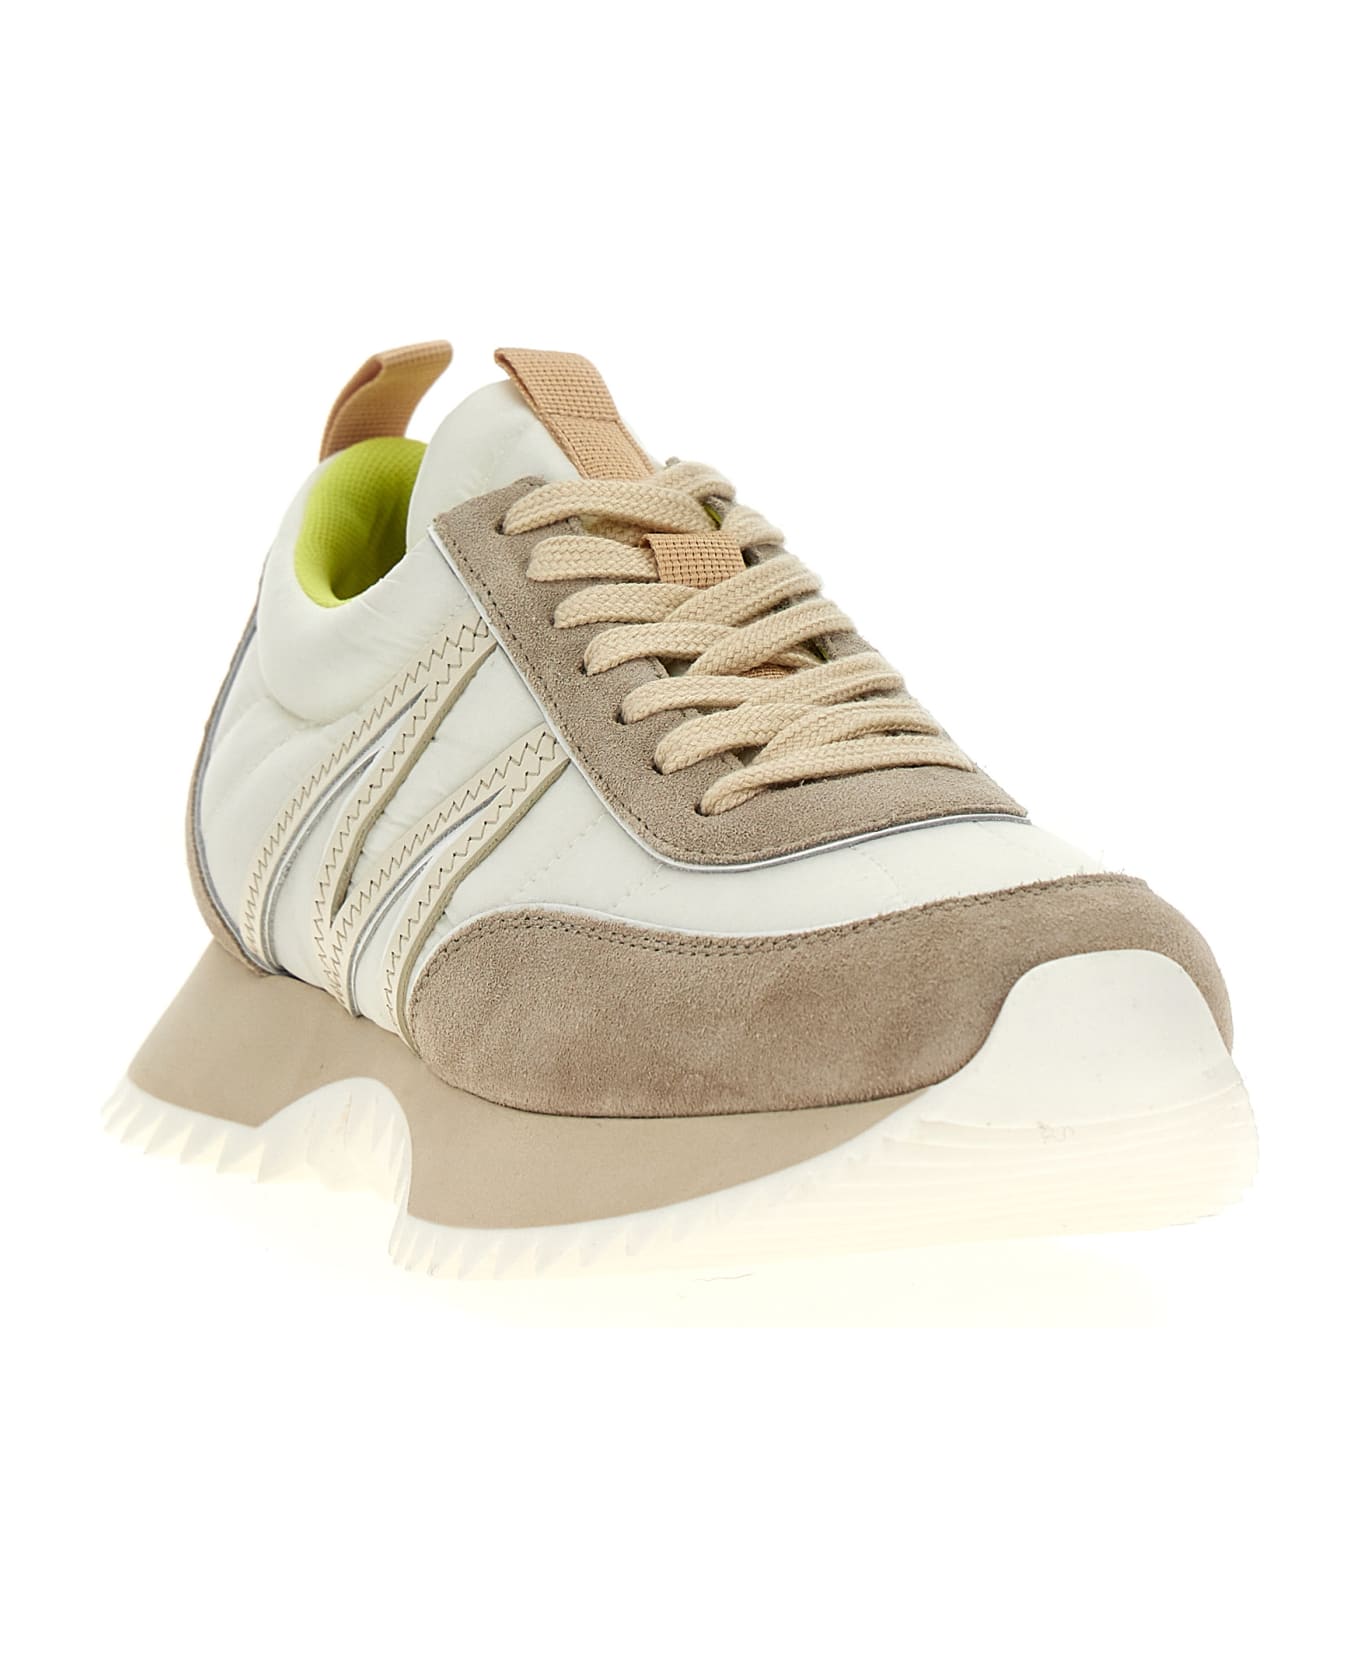 Moncler 'pacey' Sneakers - 041 スニーカー